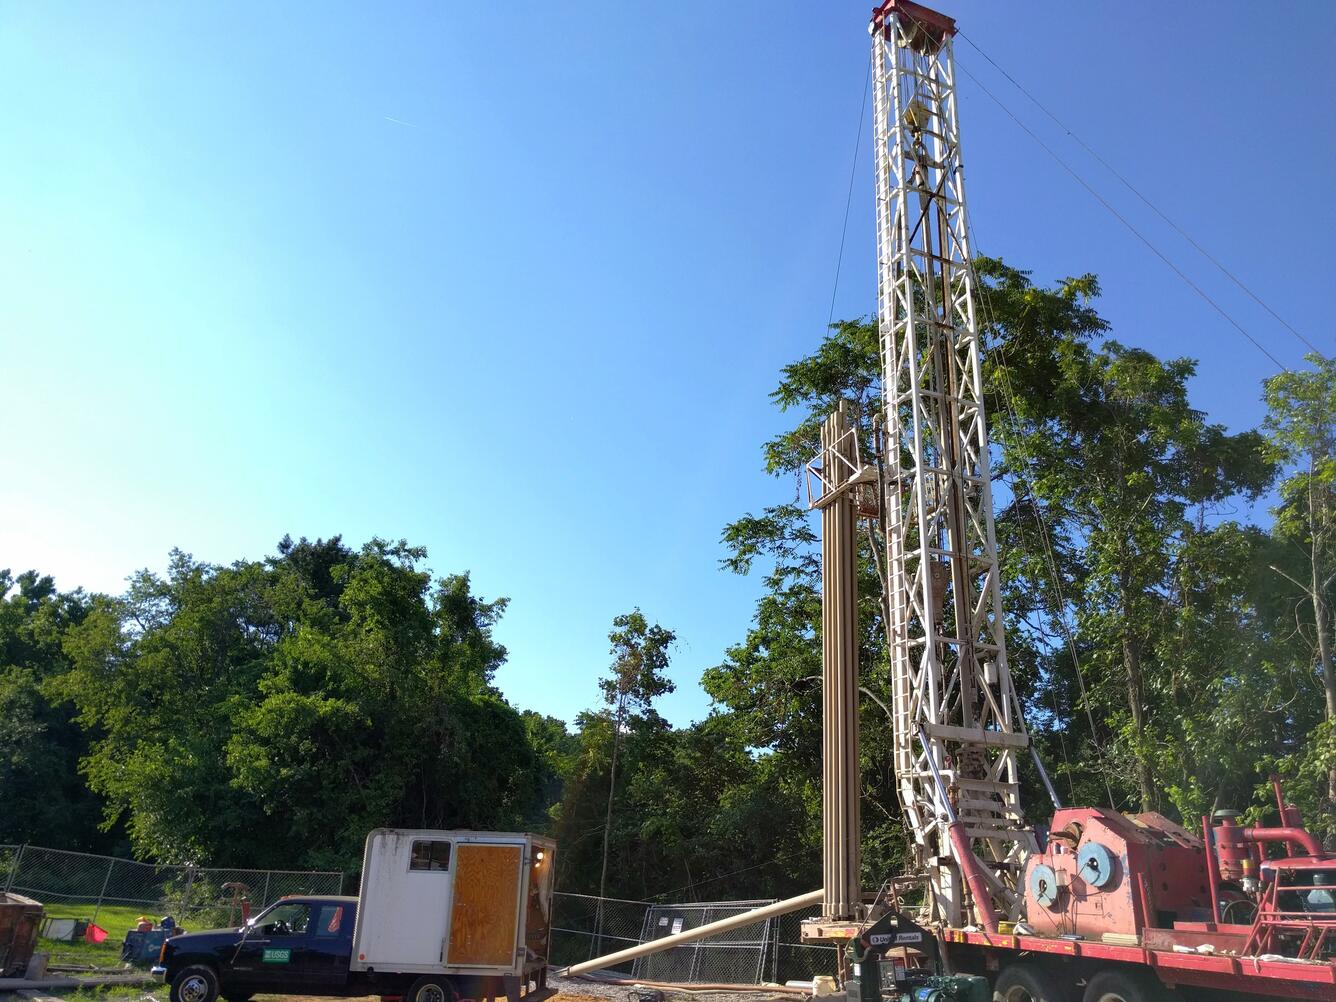 towering drill rig with a USGS truck in background